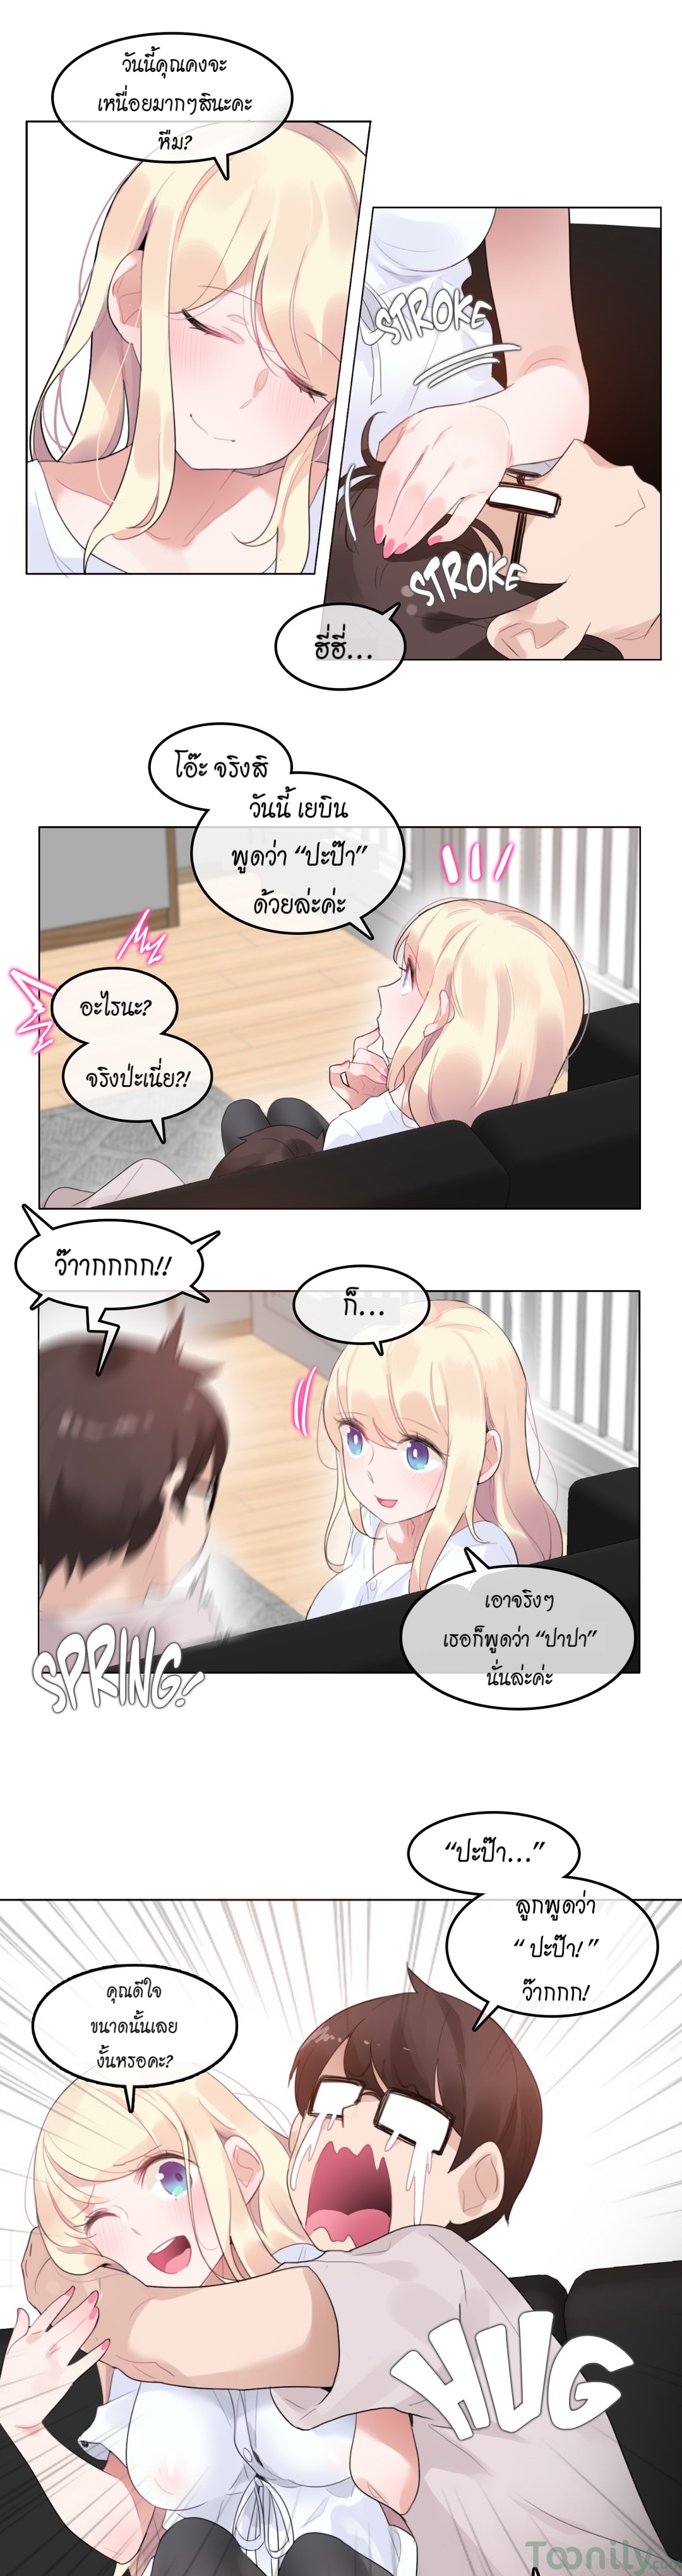 A Pervert’s Daily Life59 (7)